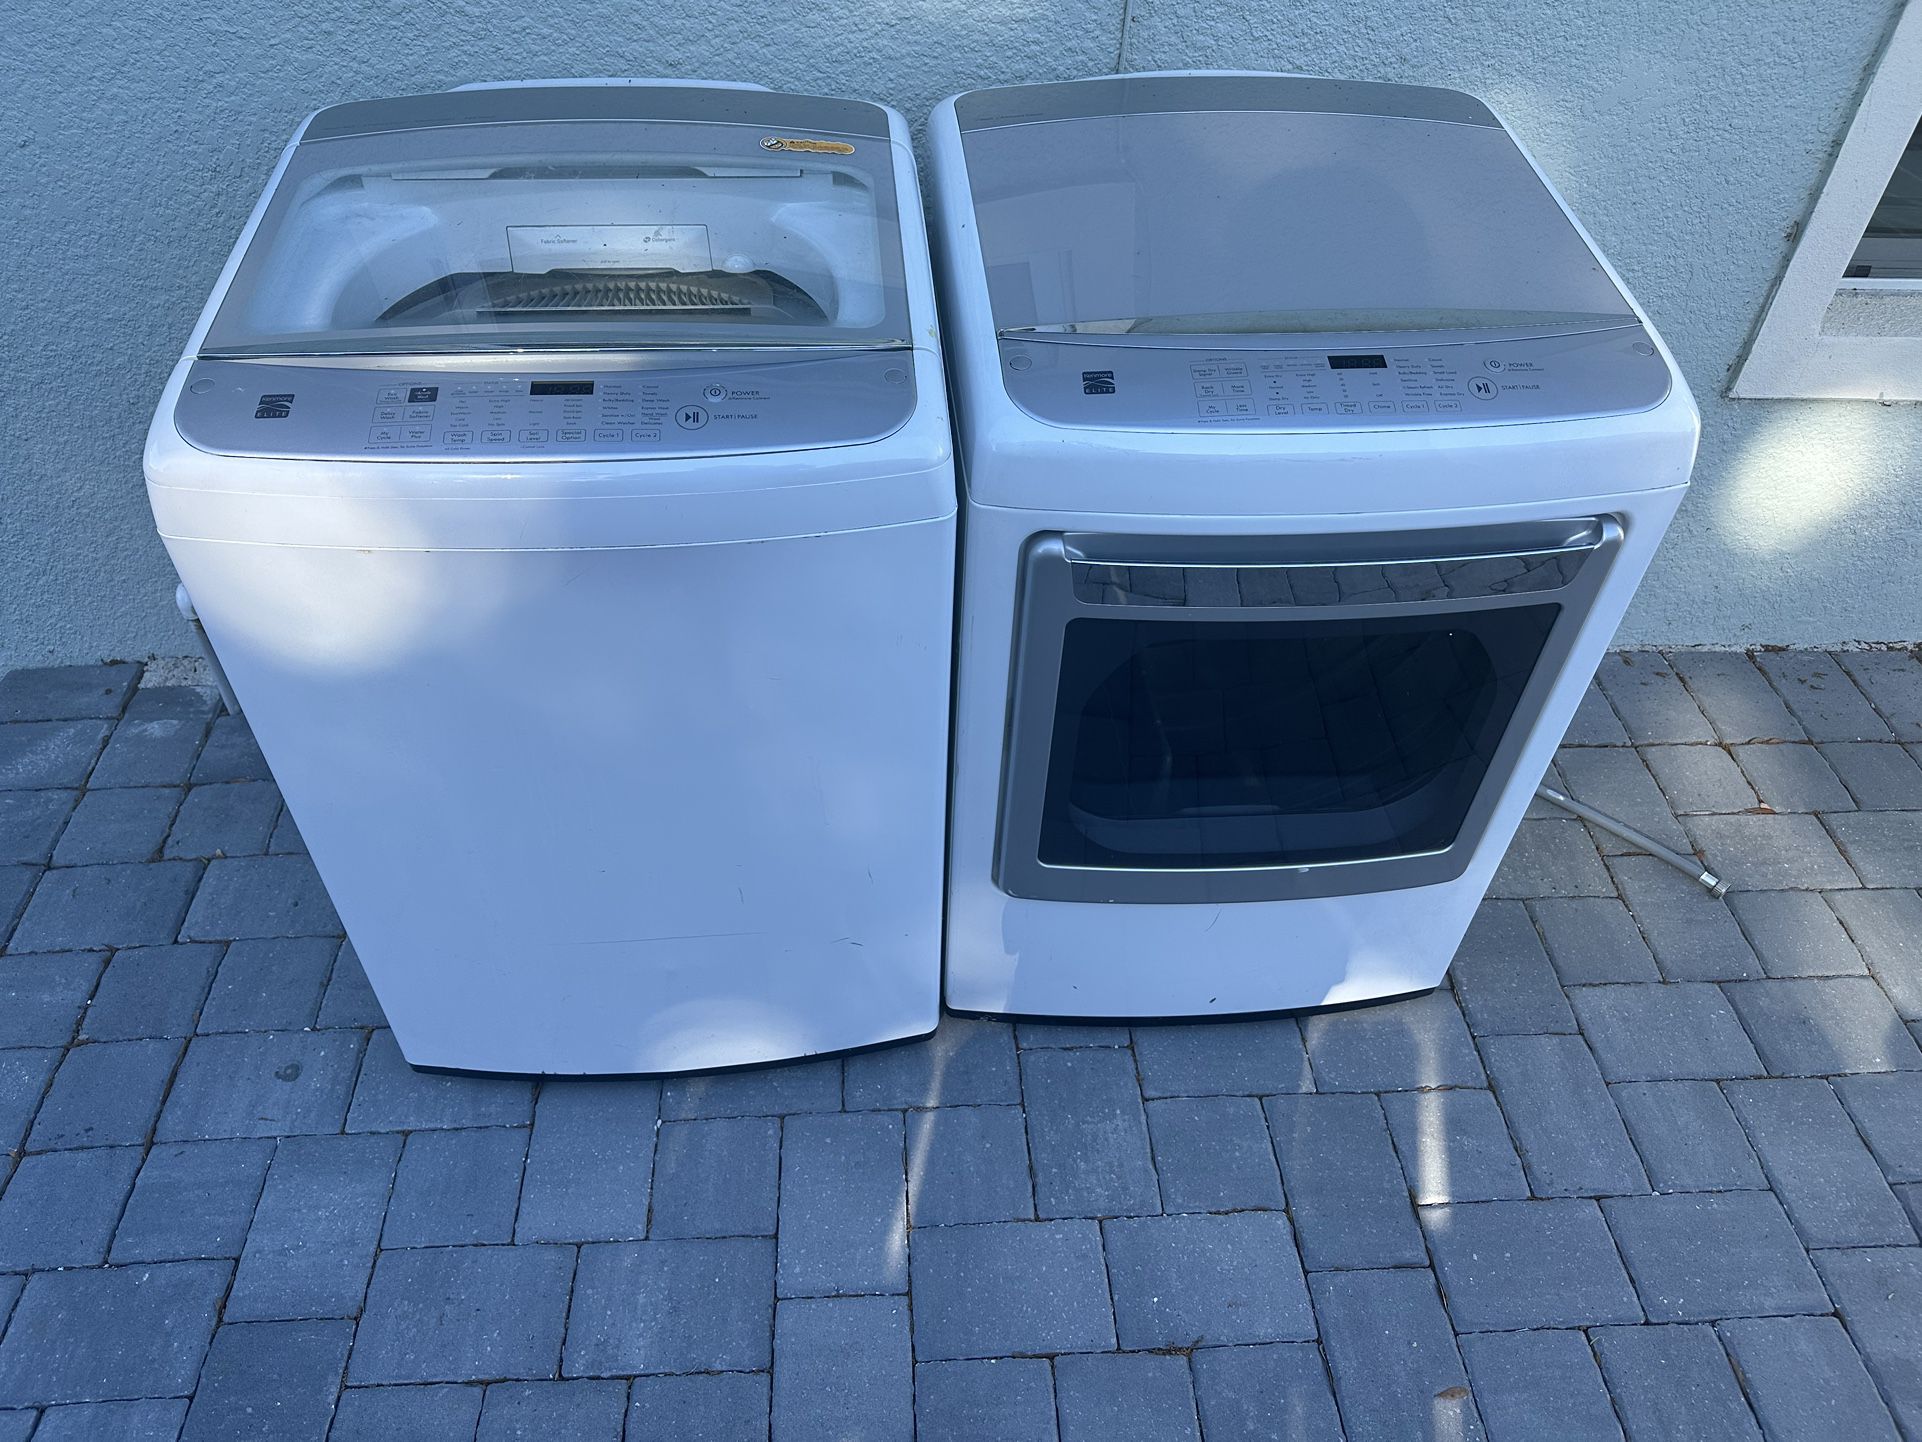 Kenmore washer And Dryer’s Set